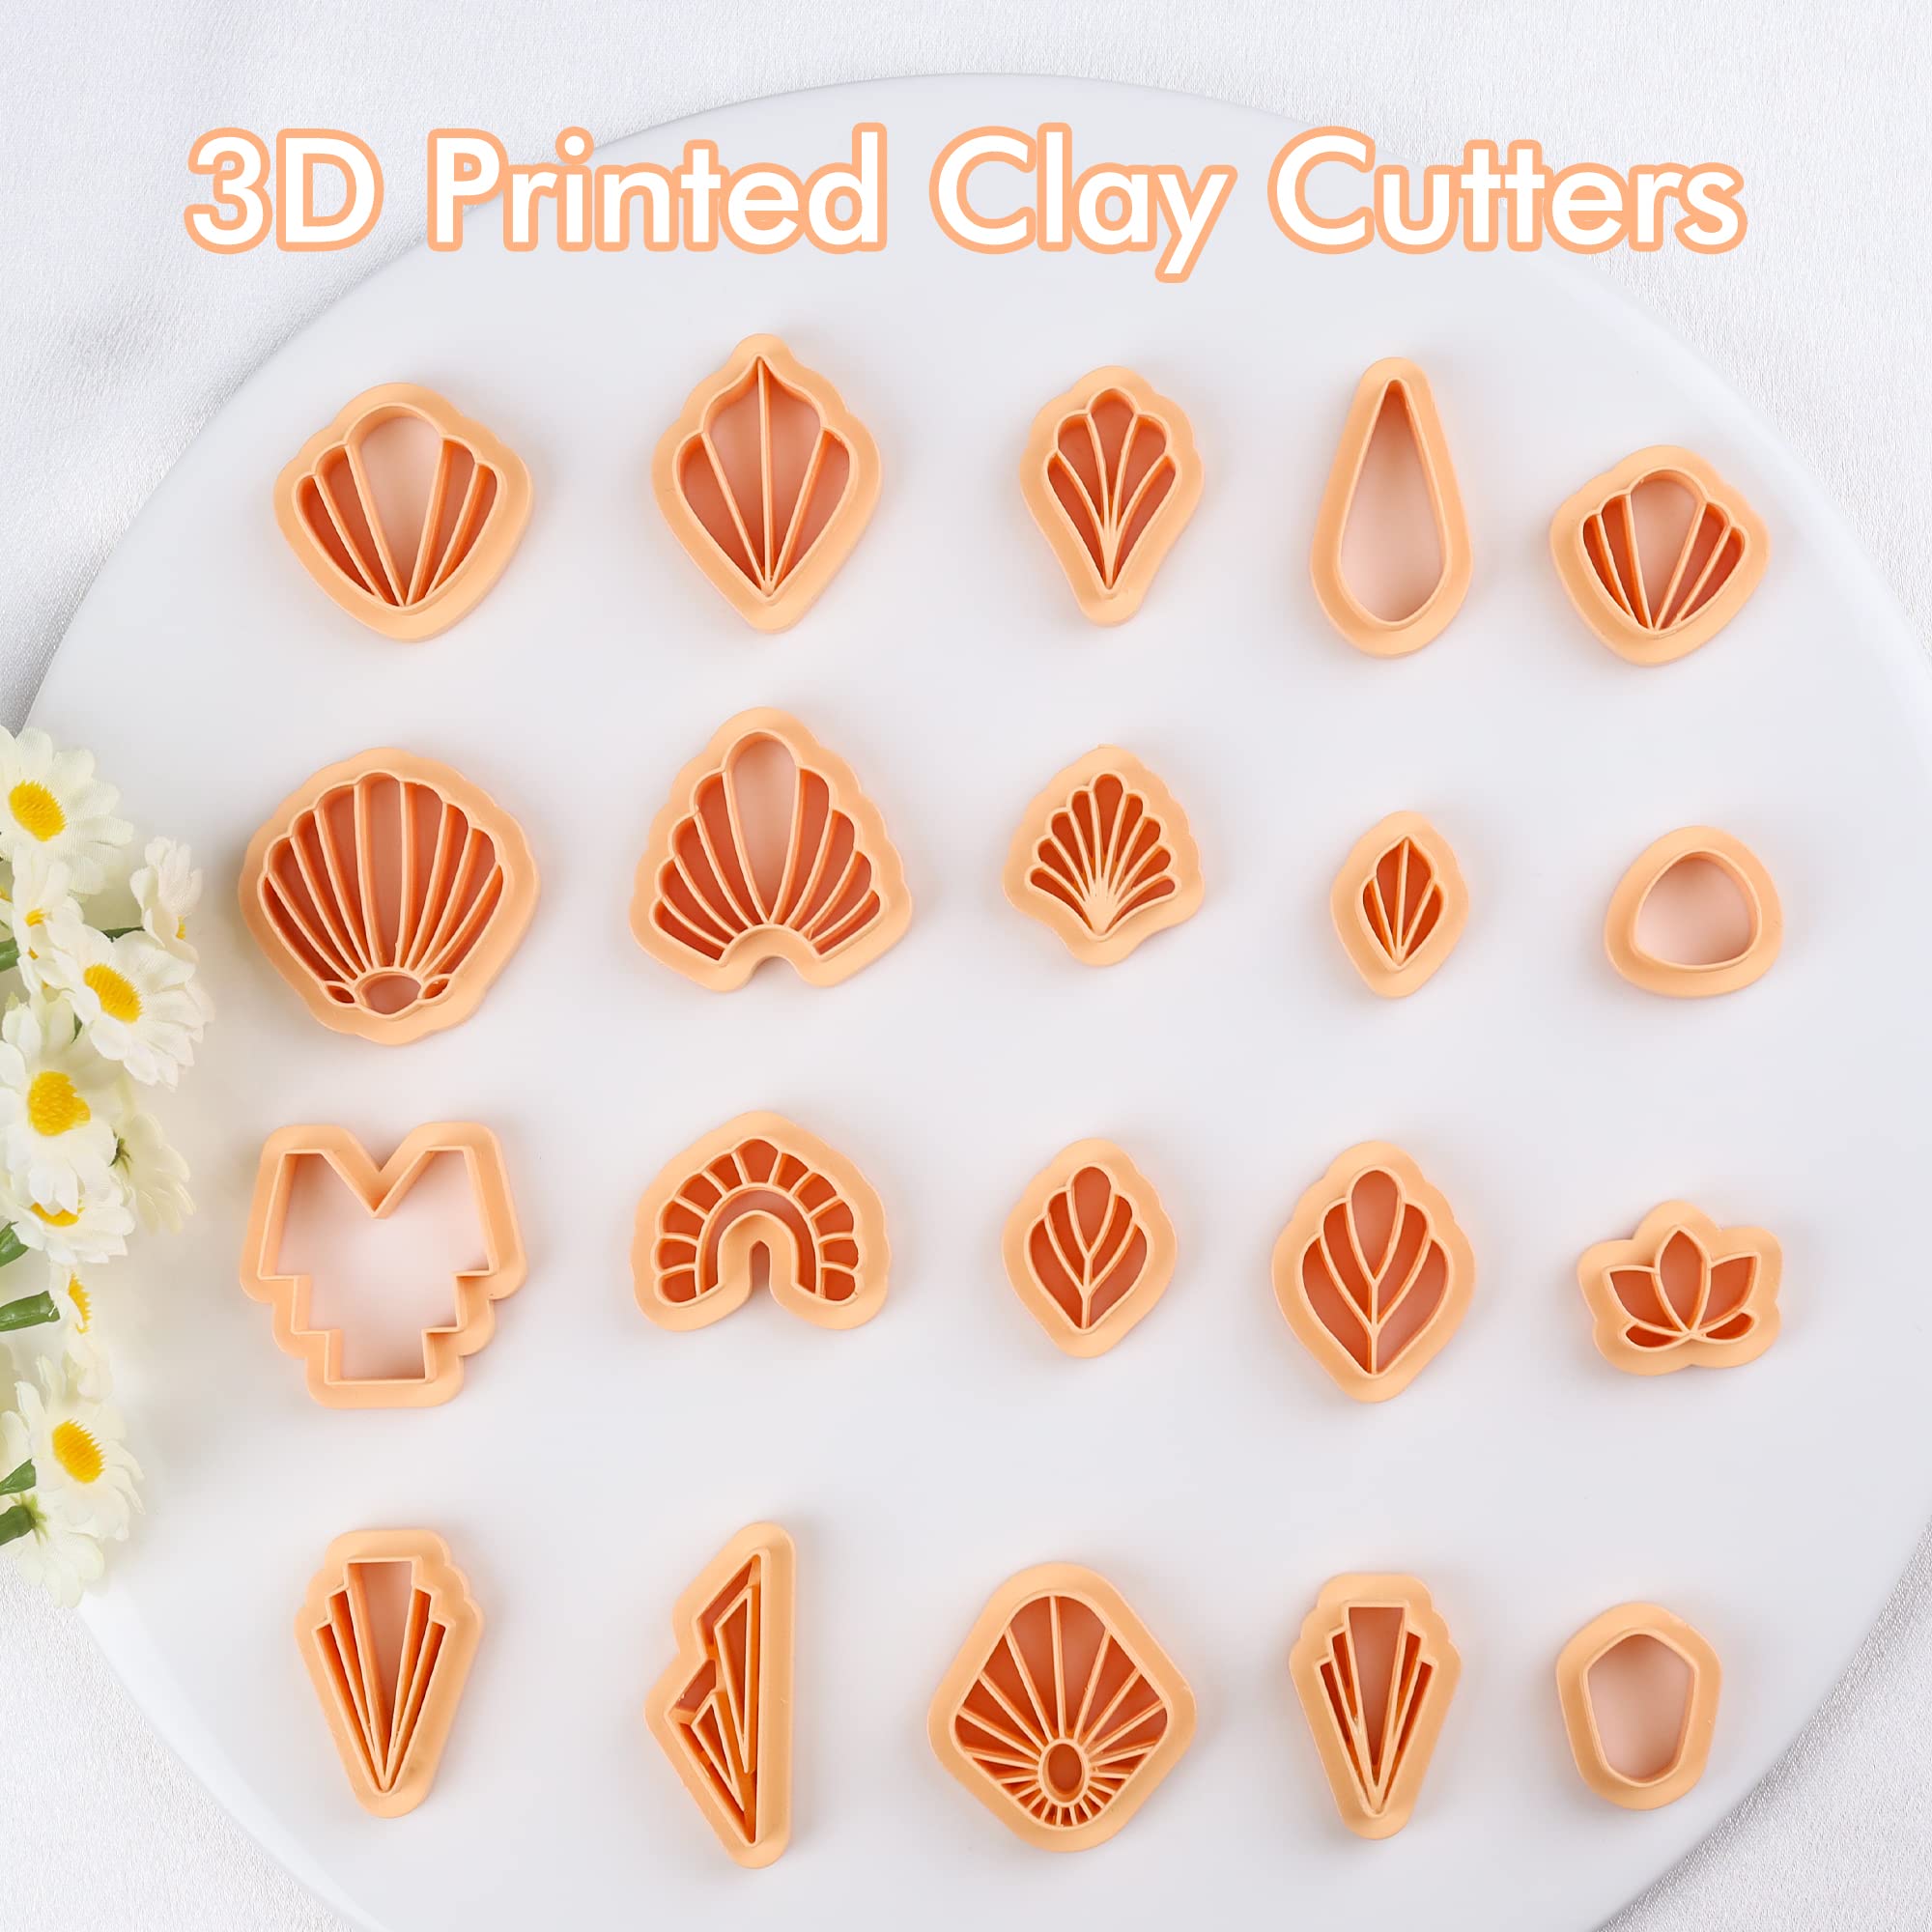 ArtCute 24pcs polymer clay earring cutters - 10 shape clay cutters